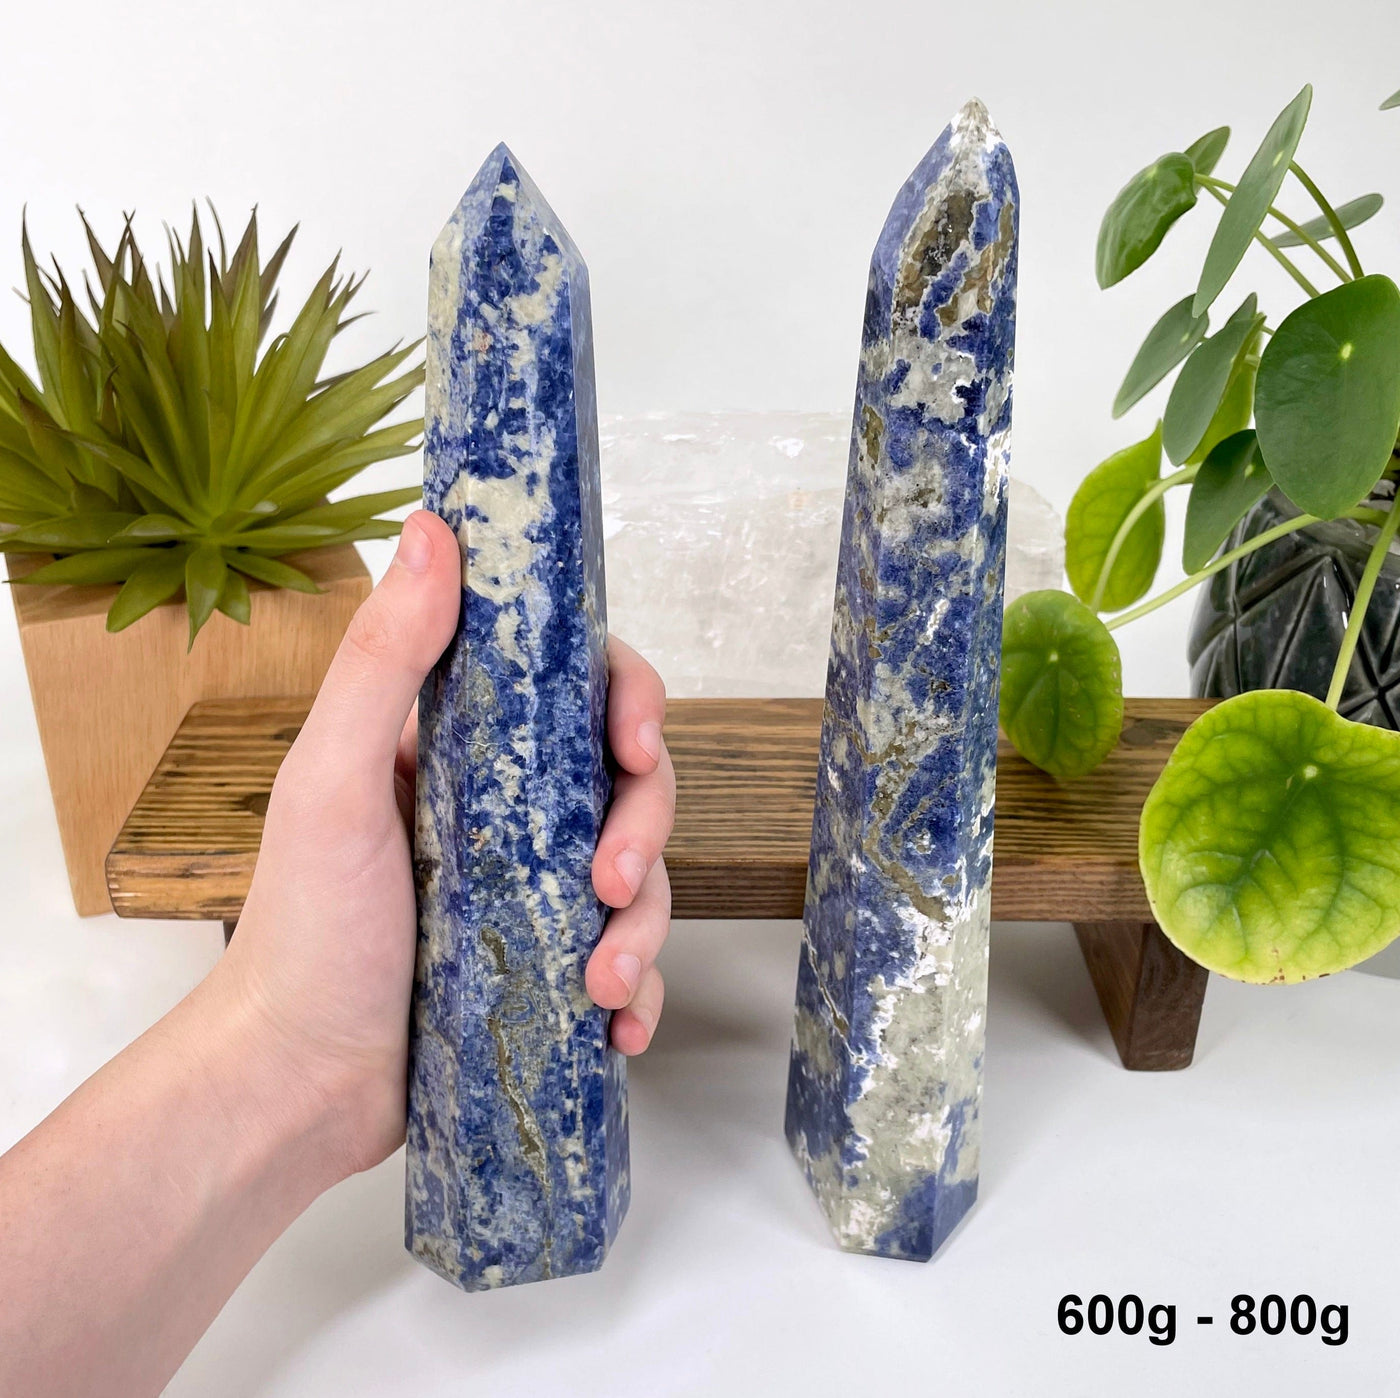 one 600g - 800g sodalite polished point in hand for size reference with one other on display for possible variations